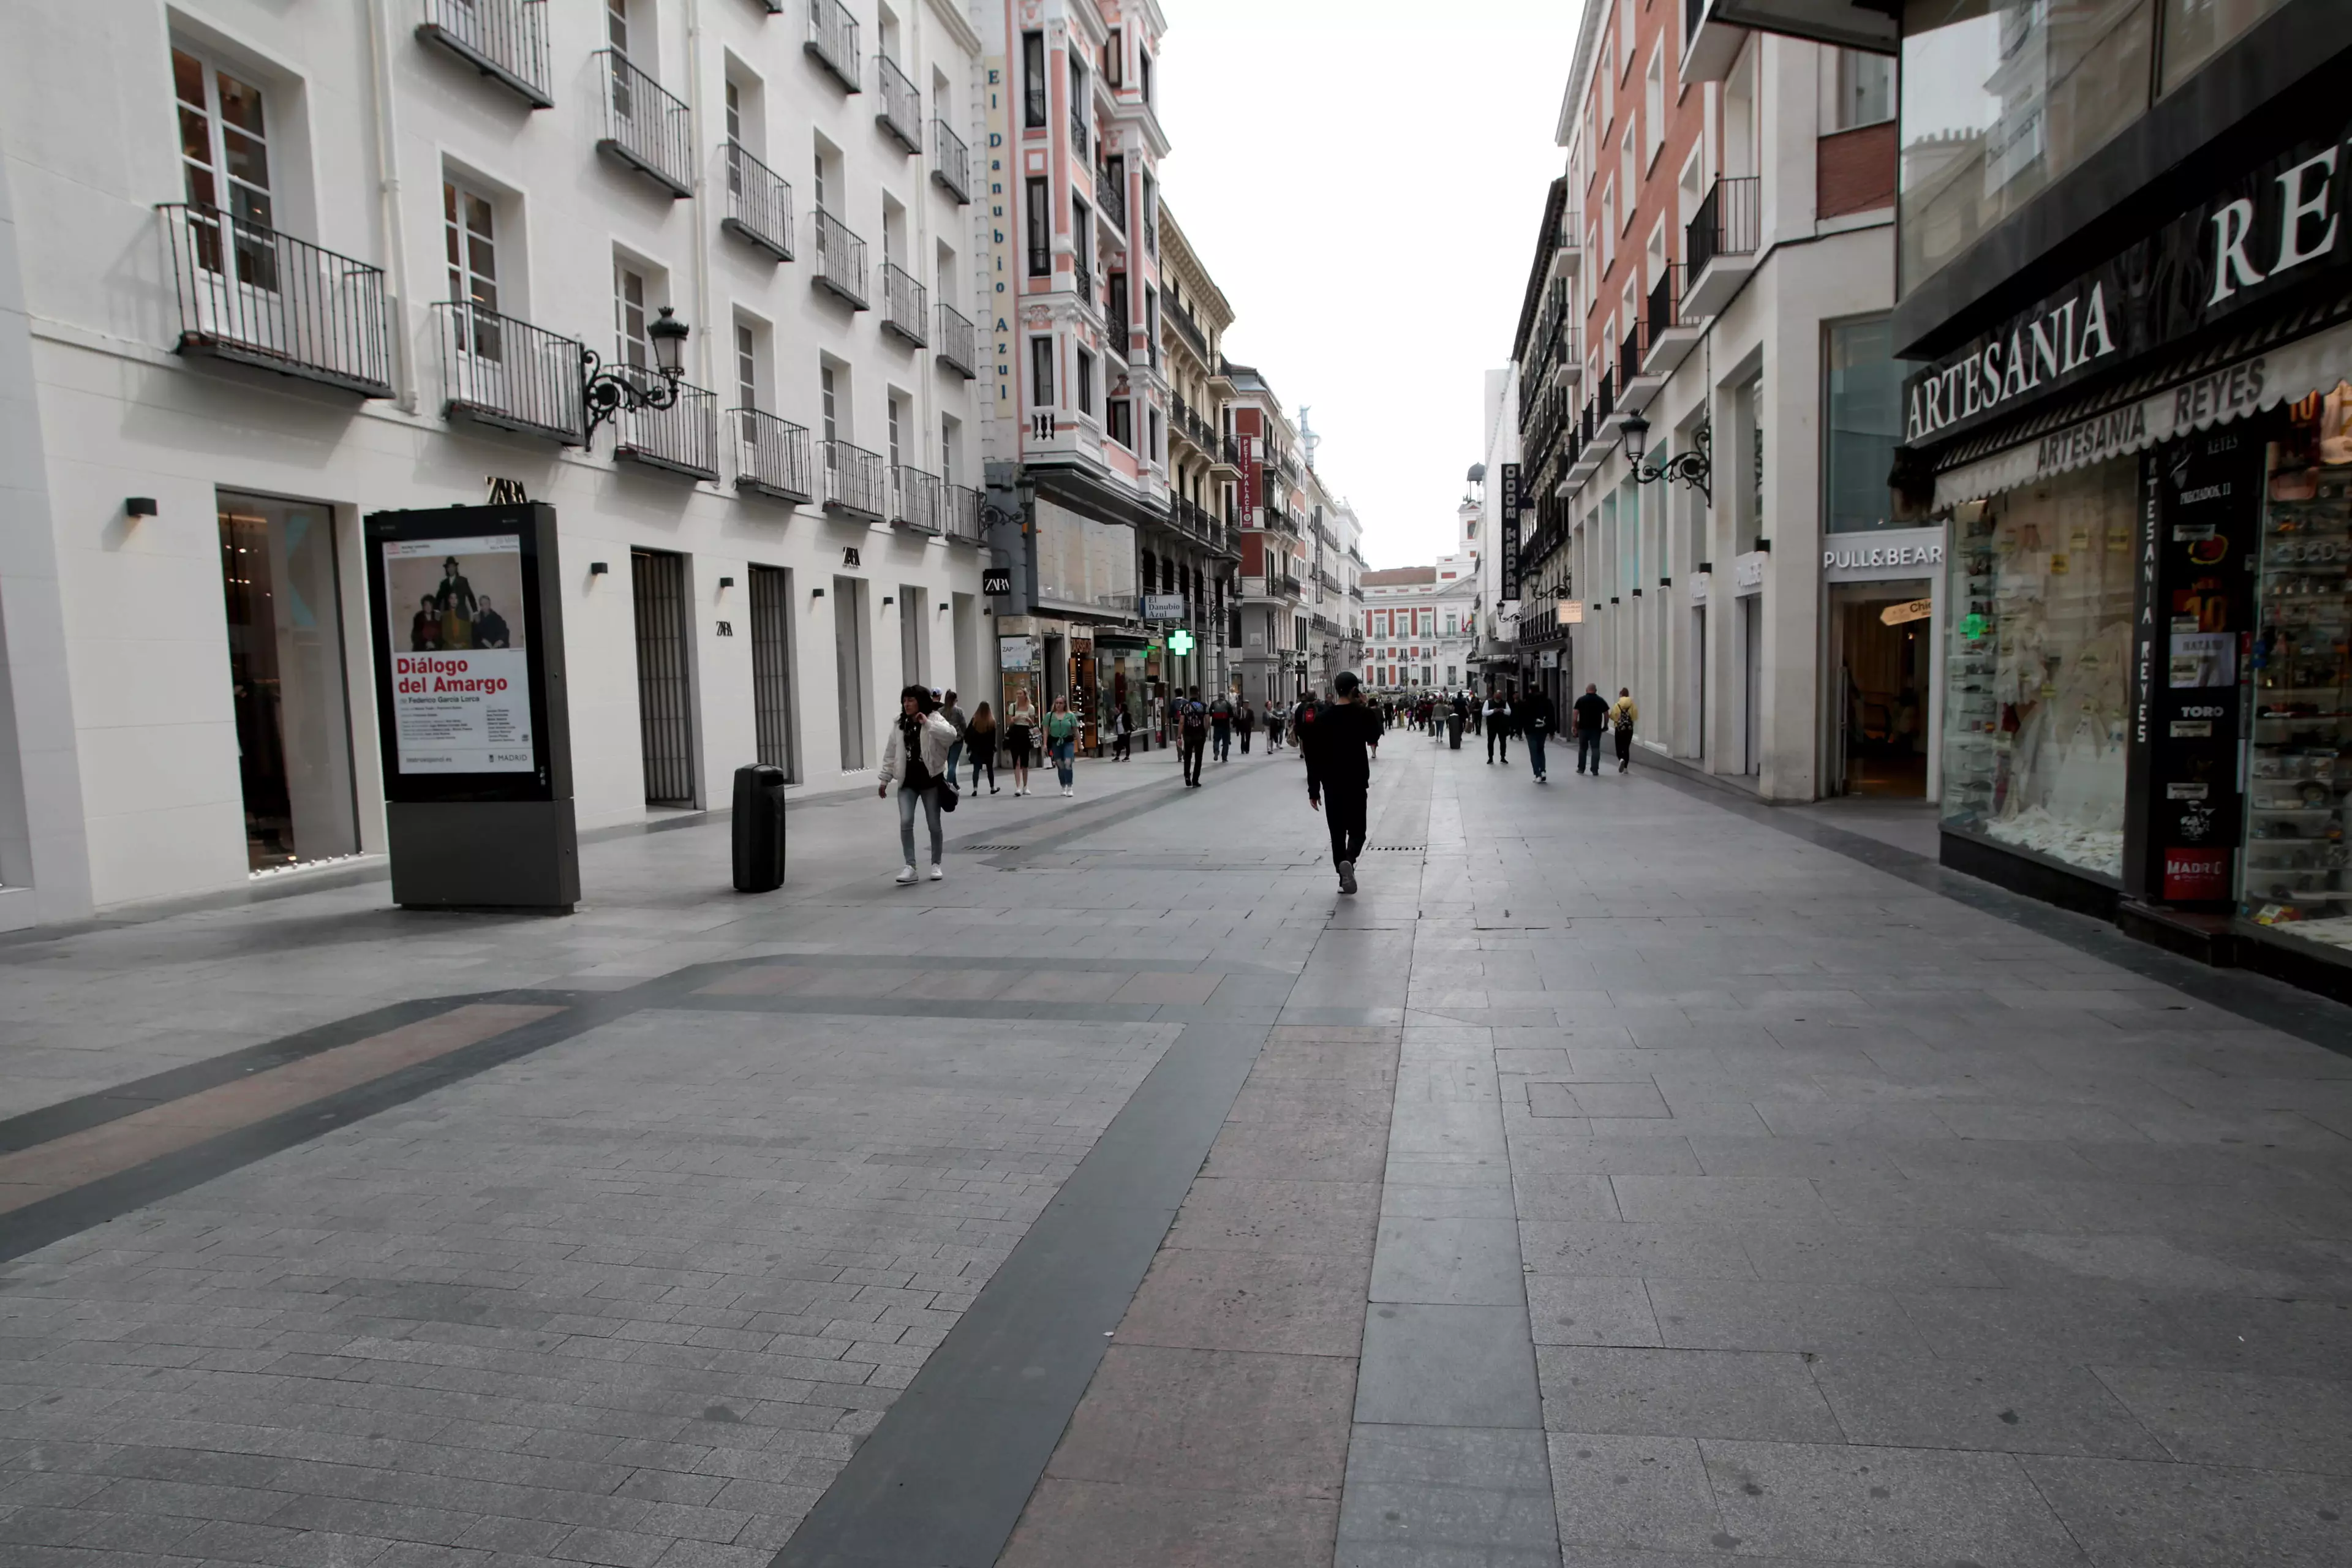 The streets of Madrid.